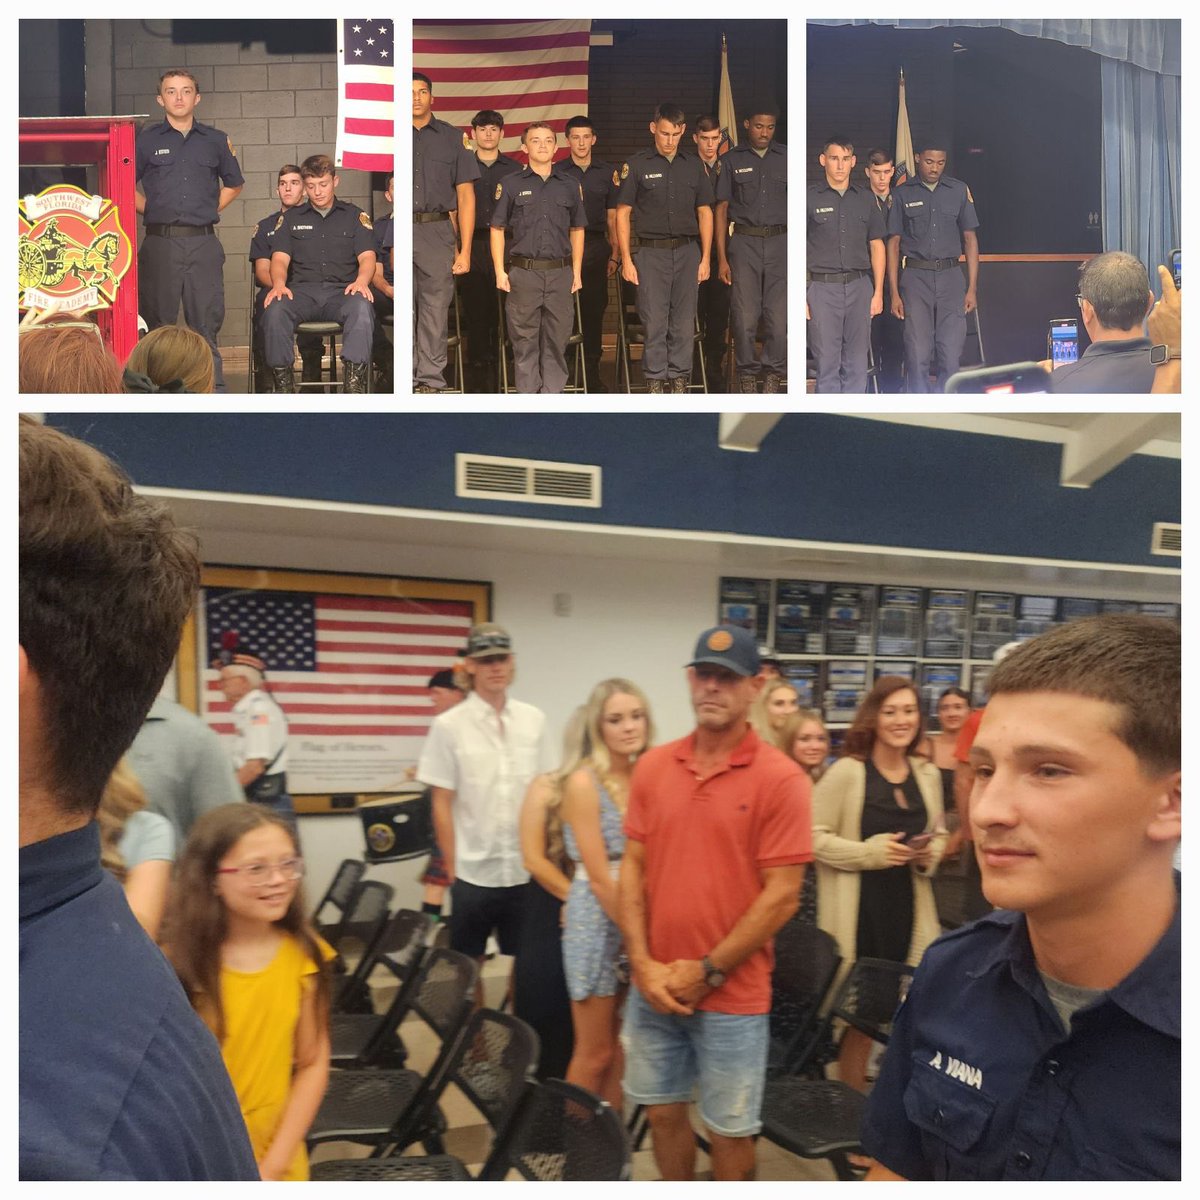 🎓🔥 Congratulations to our #FirefightingAcademy students on graduating with Firefighting 1 certification! 🚒🎉 Your dedication, bravery, and hard work have paid off. You are our heroes, ready to protect lives and communities. #BraveHeroes #WeAreEast